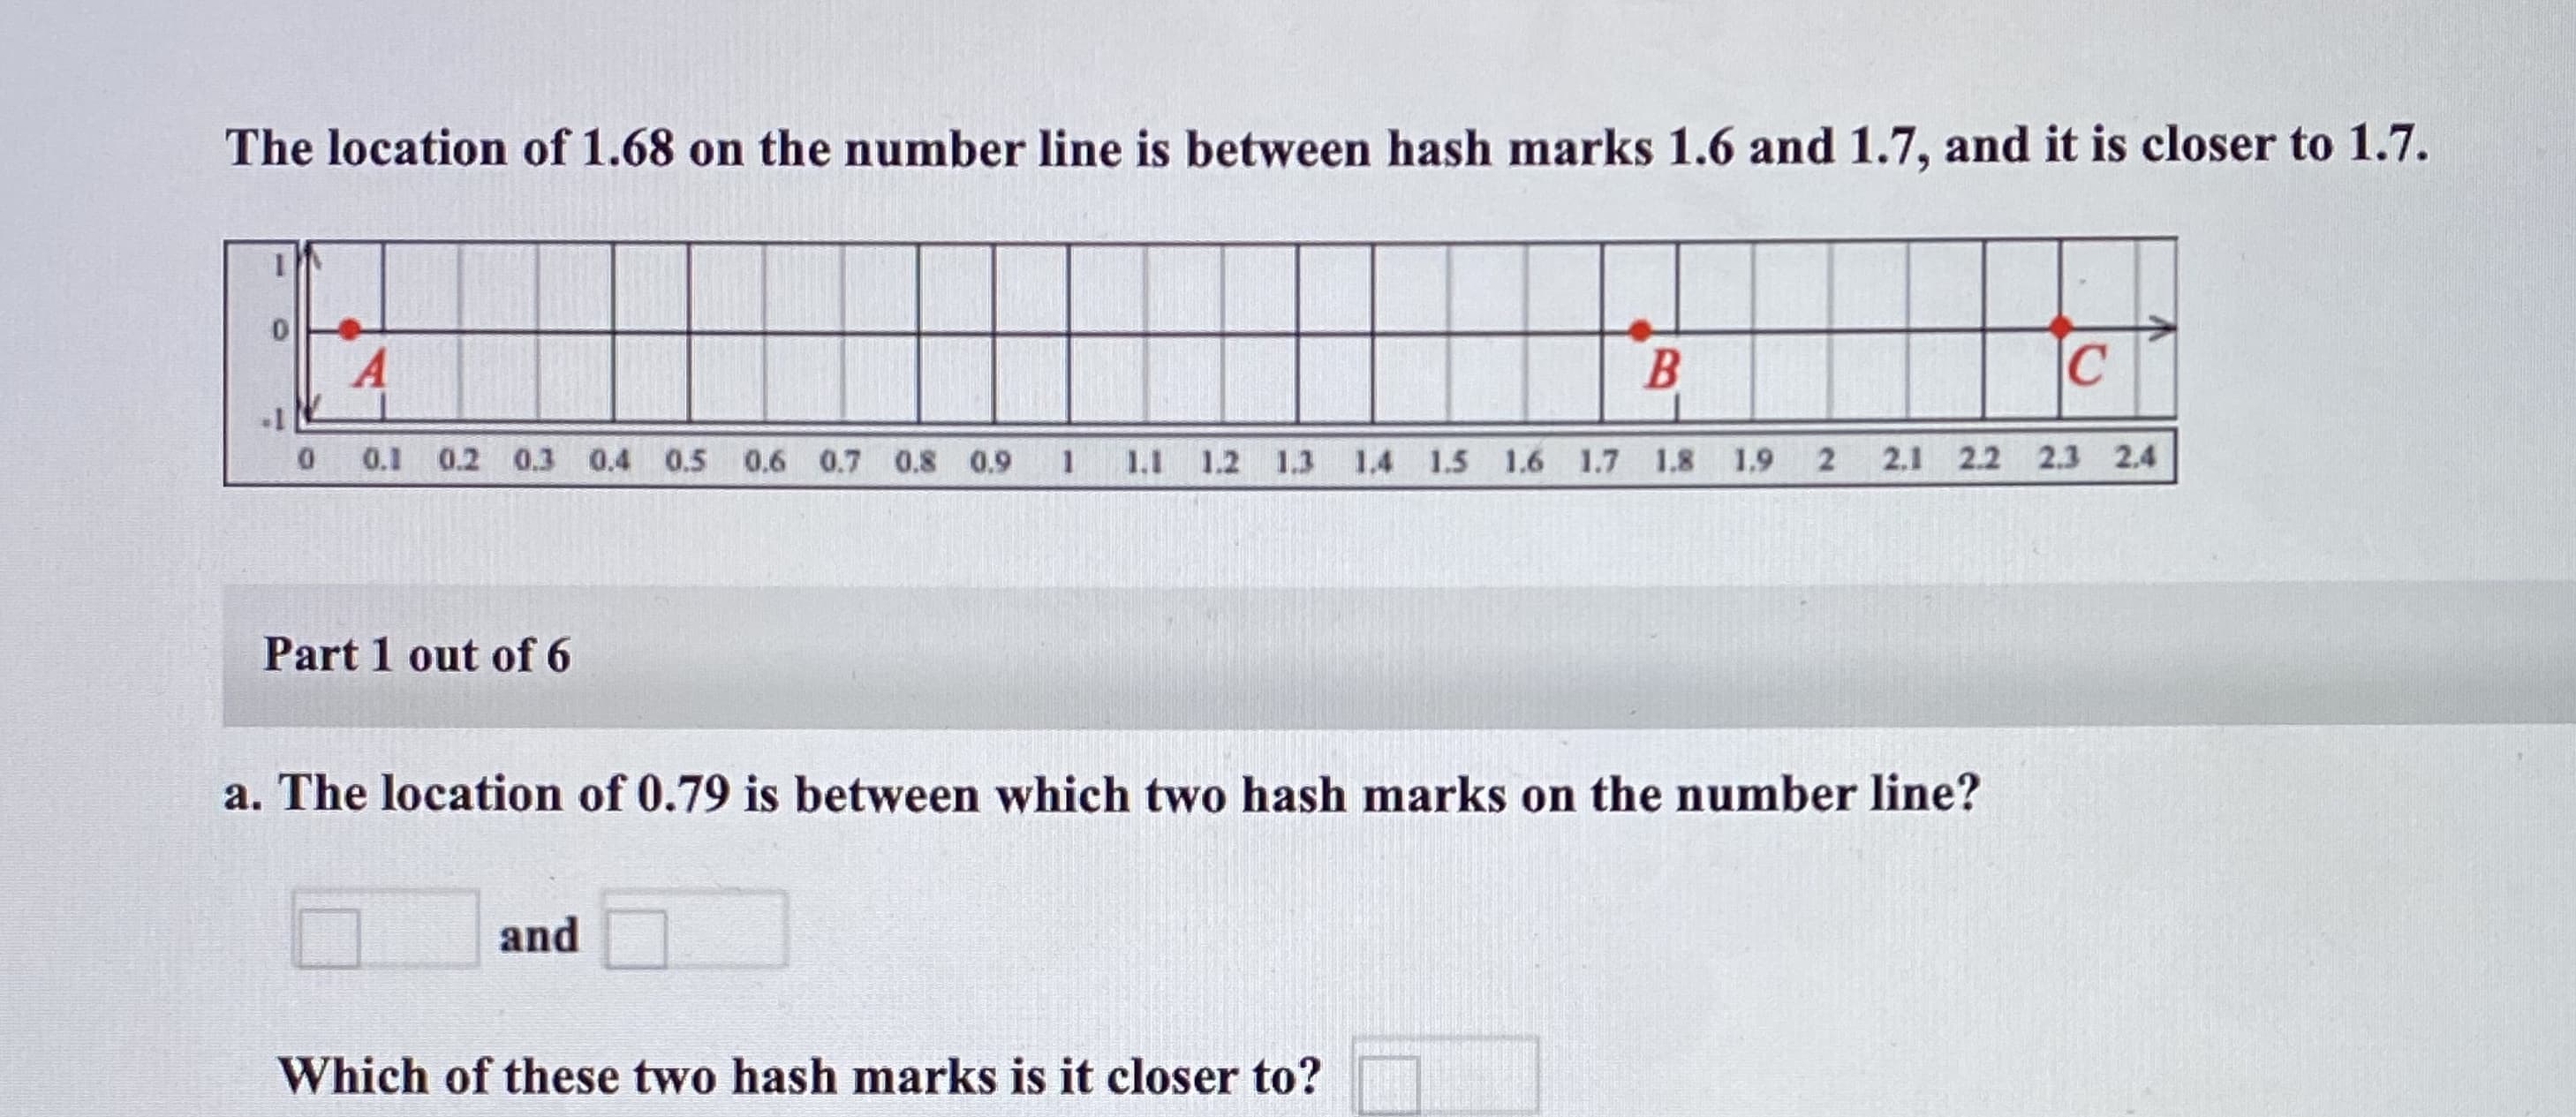 The location of 1.68 on the number line is between hash marks 1.6 and 1.7, and it is closer to 1.7.
0.1 0.2 0.3 0.4 0.5 0.6 0.7 0.8 0.9
1.1 1.2 1.3 1.4 1.5 1.6 1.7 1.8 1.9
2.1 2.2 2.3 2.4
Part 1 out of 6
a. The location of 0.79 is between which two hash marks on the number line?
and
Which of these two hash marks is it closer to?
